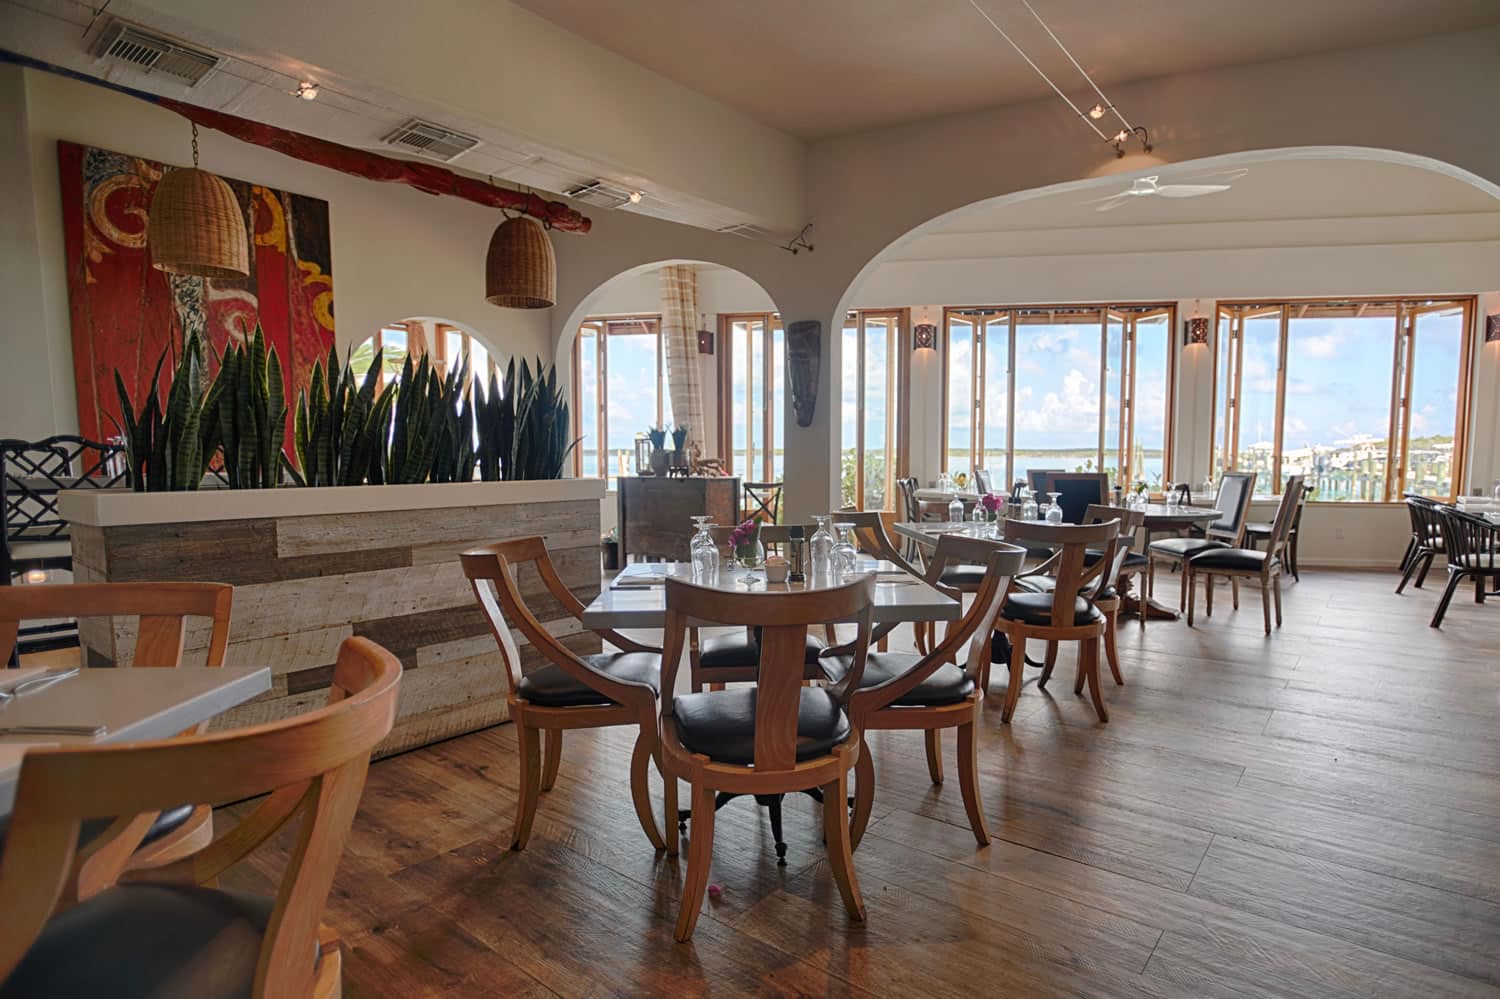 A restaurant with wooden tables and chairs and a view of the ocean, located on Staniel Cay in The Bahamas.